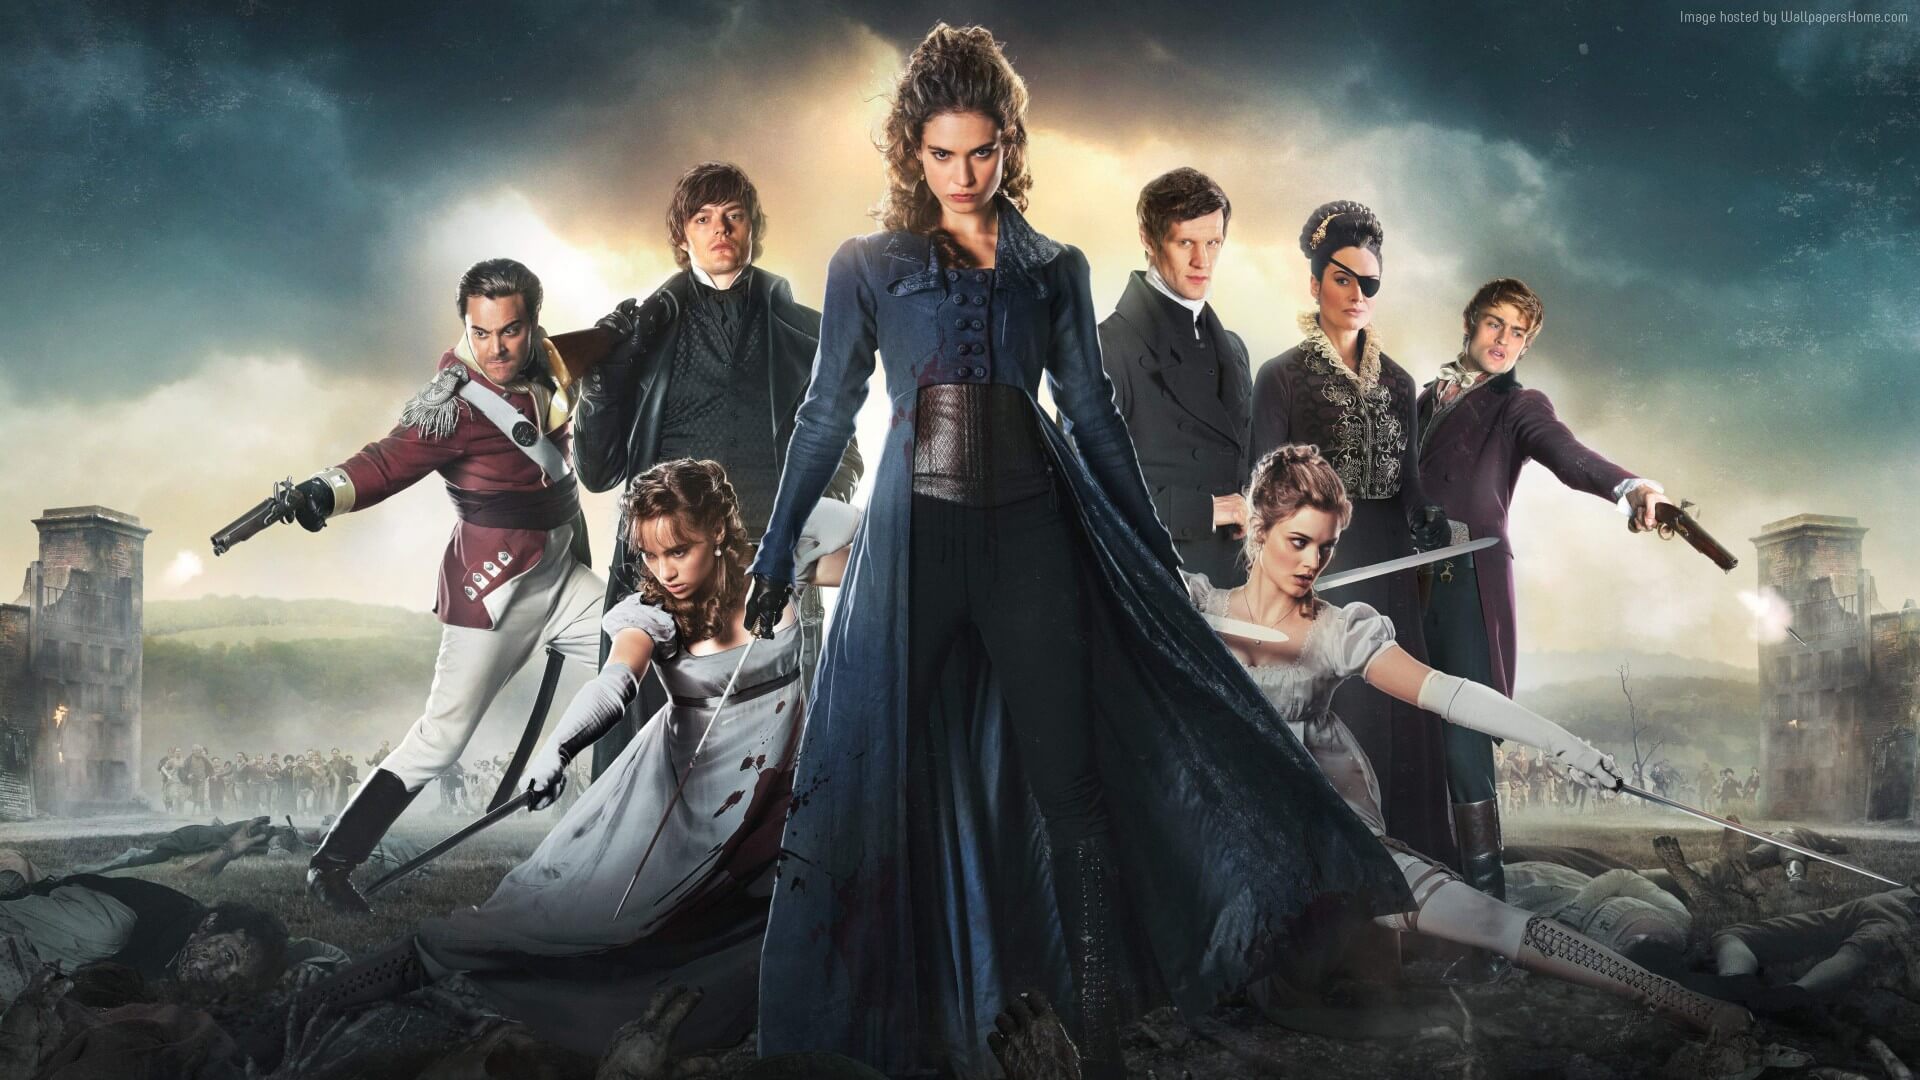 The Pride and Prejudice and Zombies cast break out some killer moves